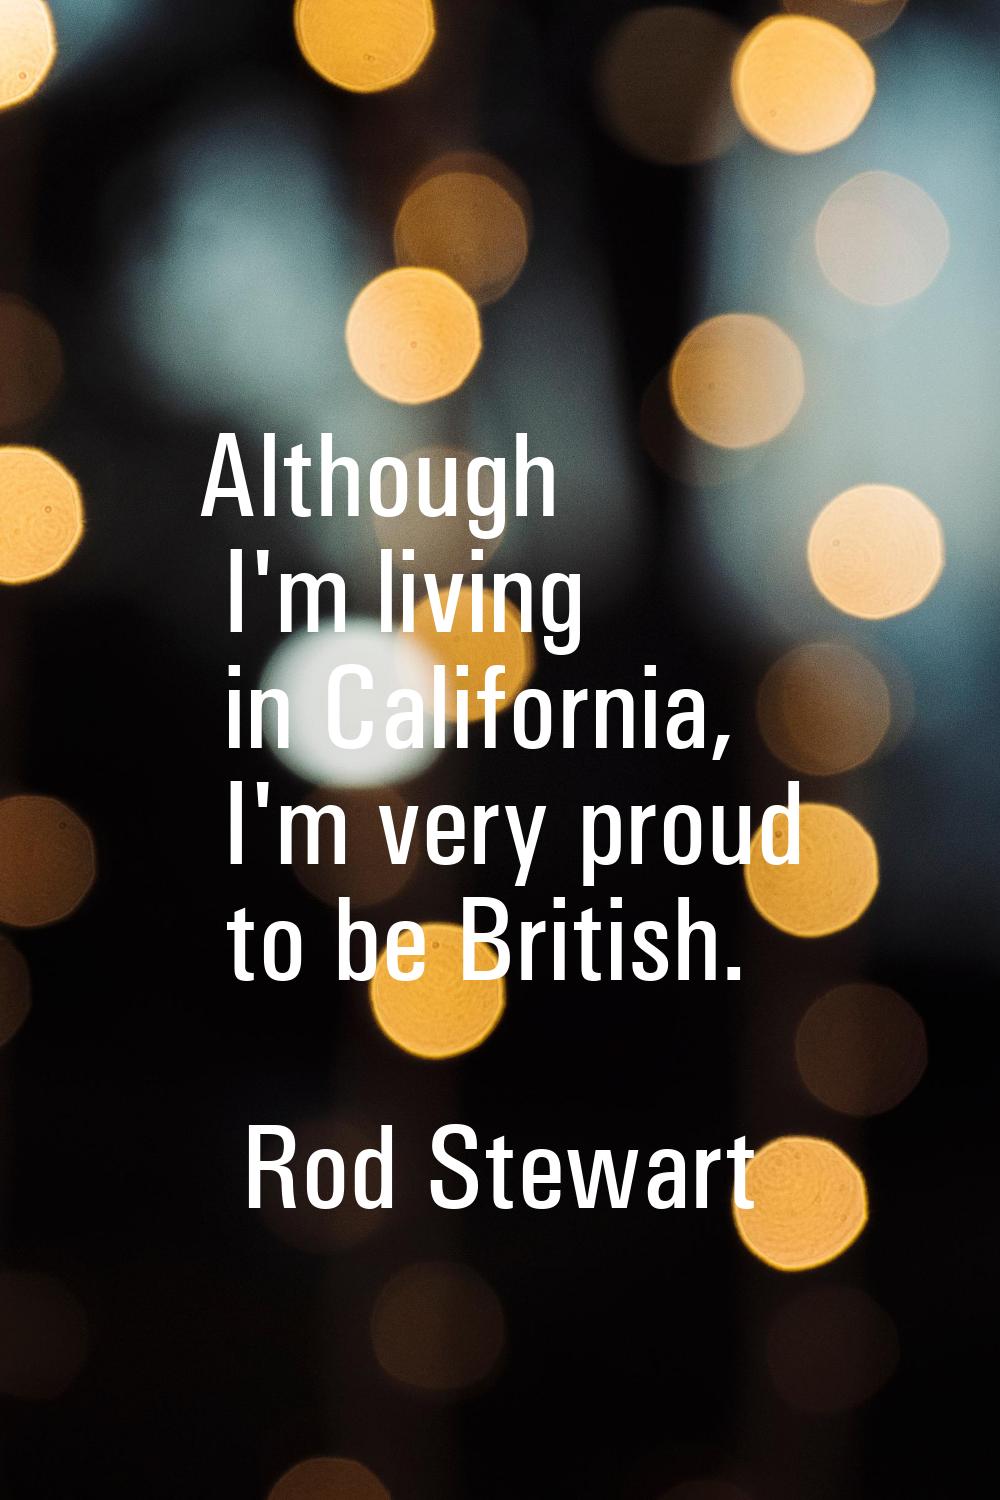 Although I'm living in California, I'm very proud to be British.